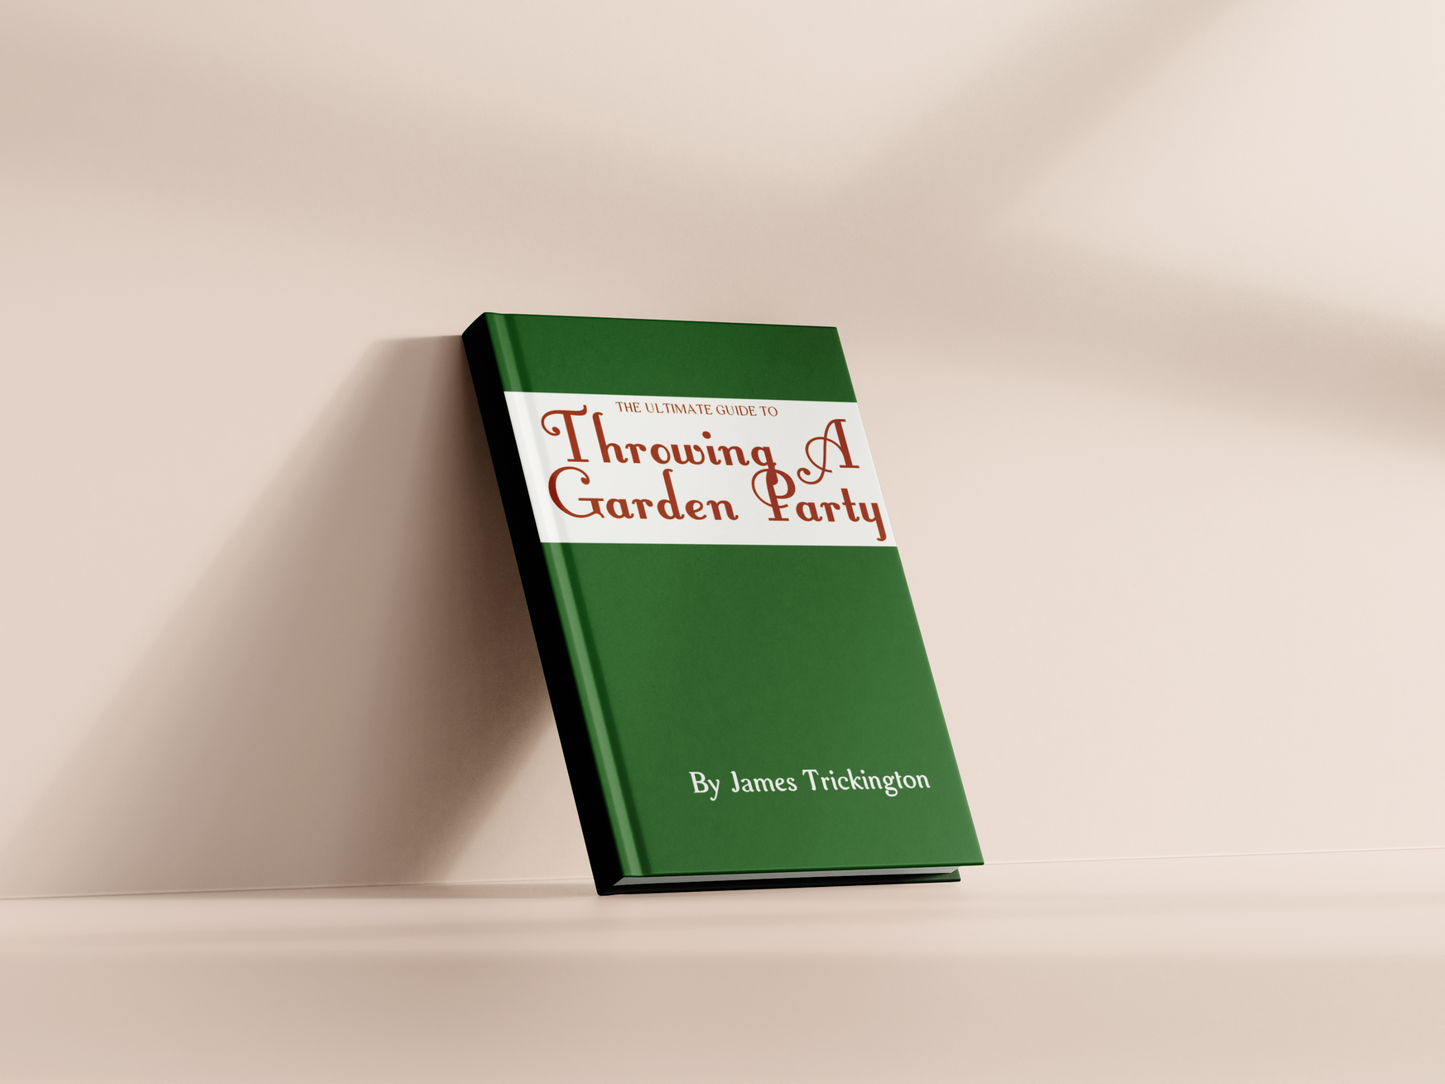 The Ultimate Guide to Throwing a Garden Party by James Trickington